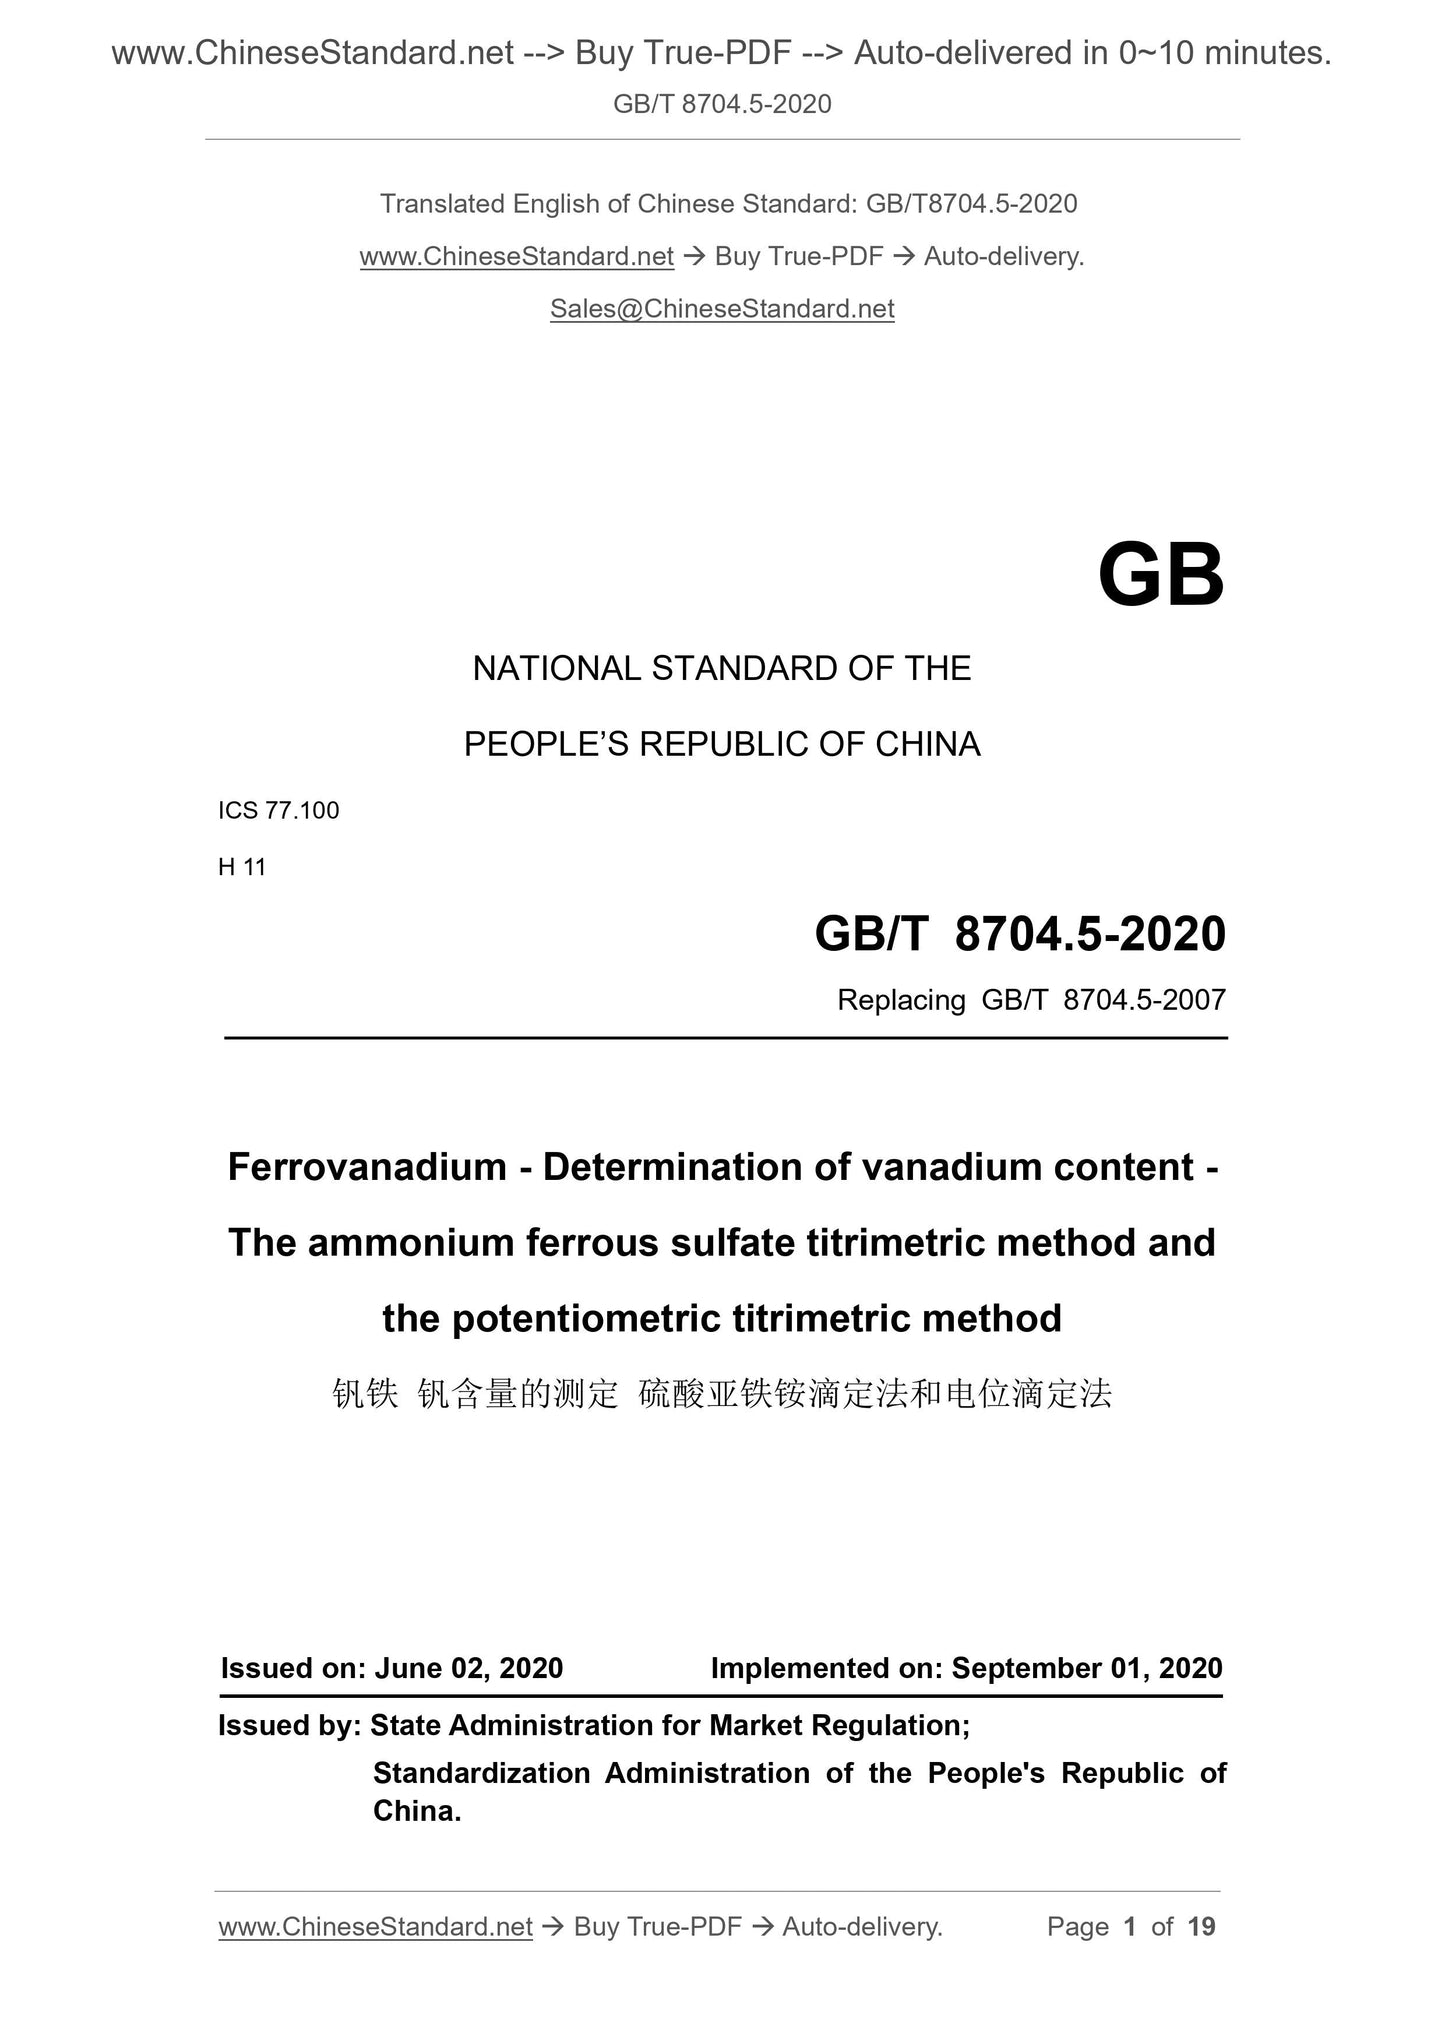 GB/T 8704.5-2020 Page 1